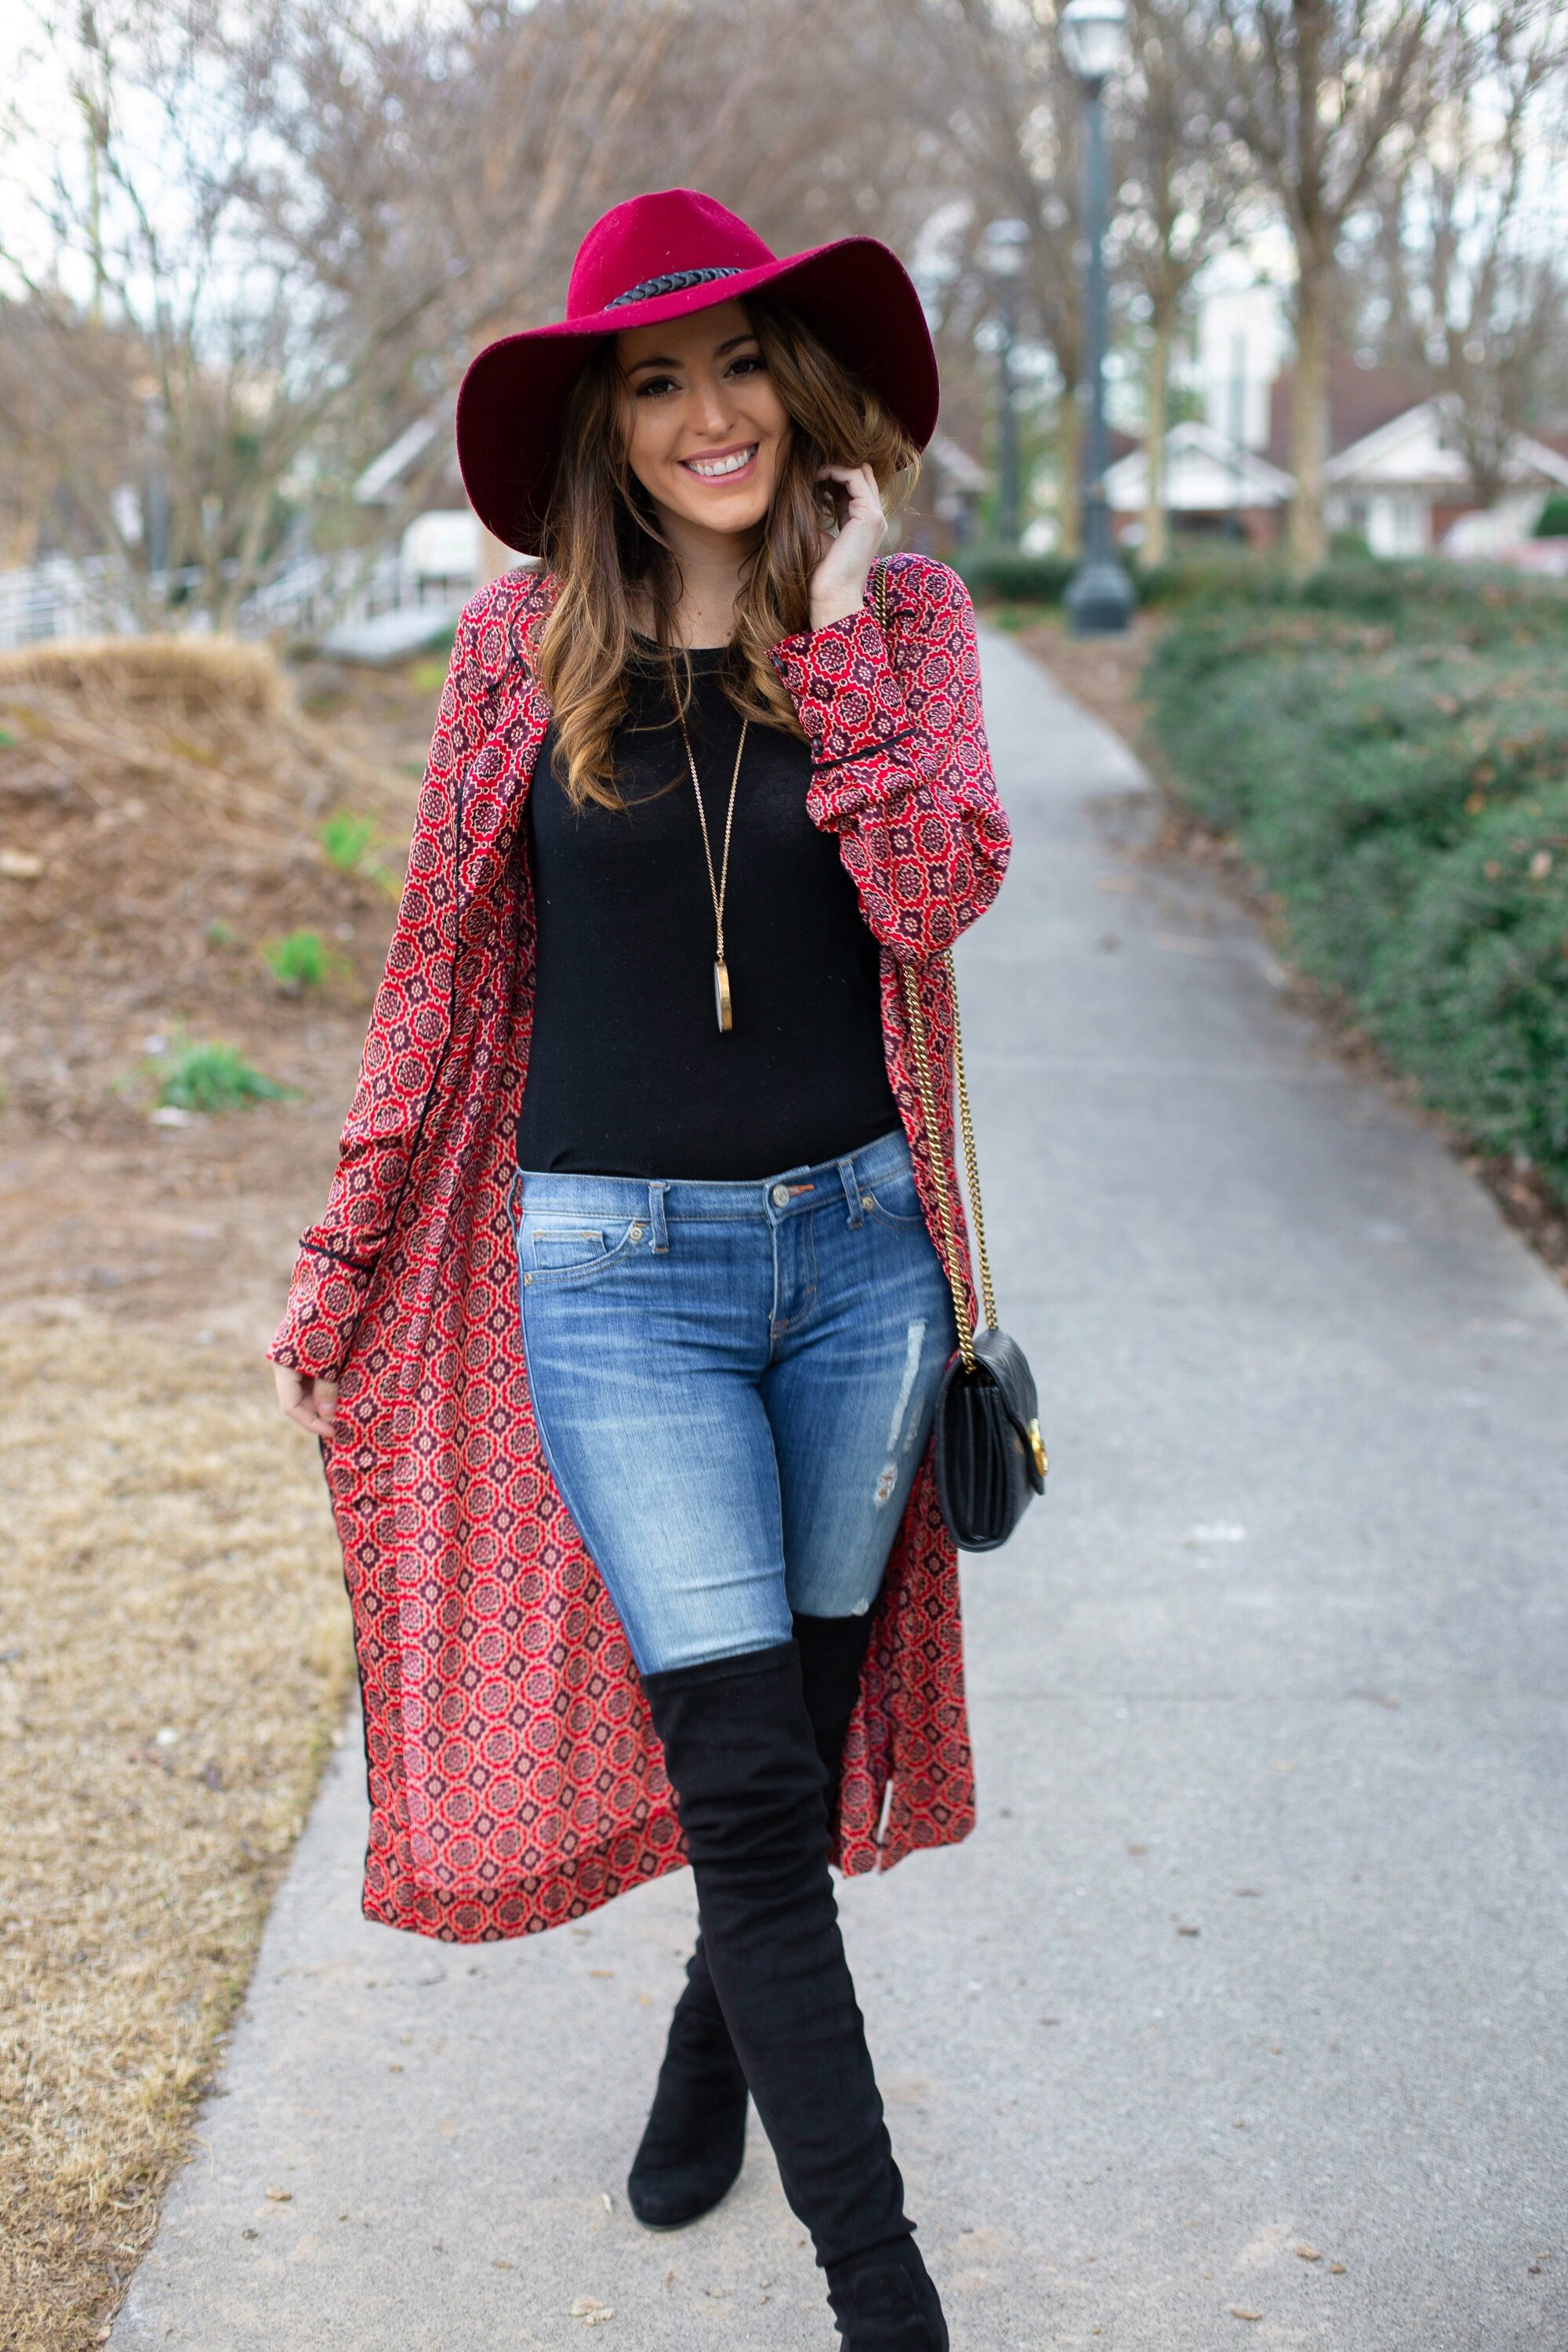 Free People Dawn To Dusk Printed Maxi Top, how to wear a kimono in the winter, sunday brunch at gypsy kitchen, sunday funday, what to do in Atlanta, how to wear red, boho style, how to wear over the knee boots, how to wear a floppy wool hat, wide brim fedora